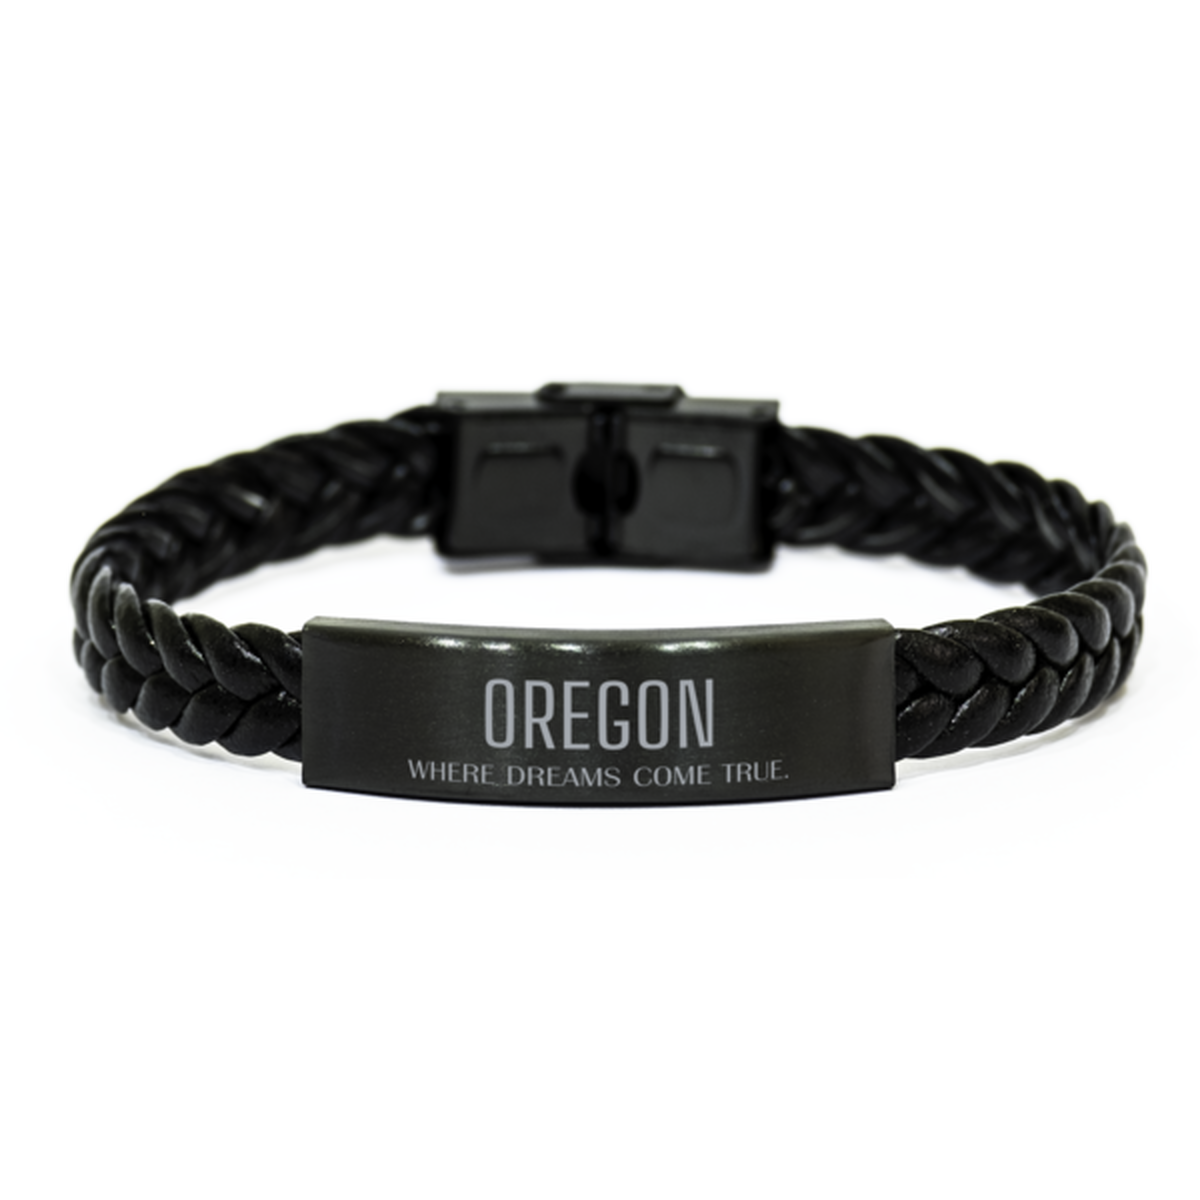 Love Oregon State Braided Leather Bracelet, Oregon Where dreams come true, Birthday Inspirational Gifts For Oregon Men, Women, Friends